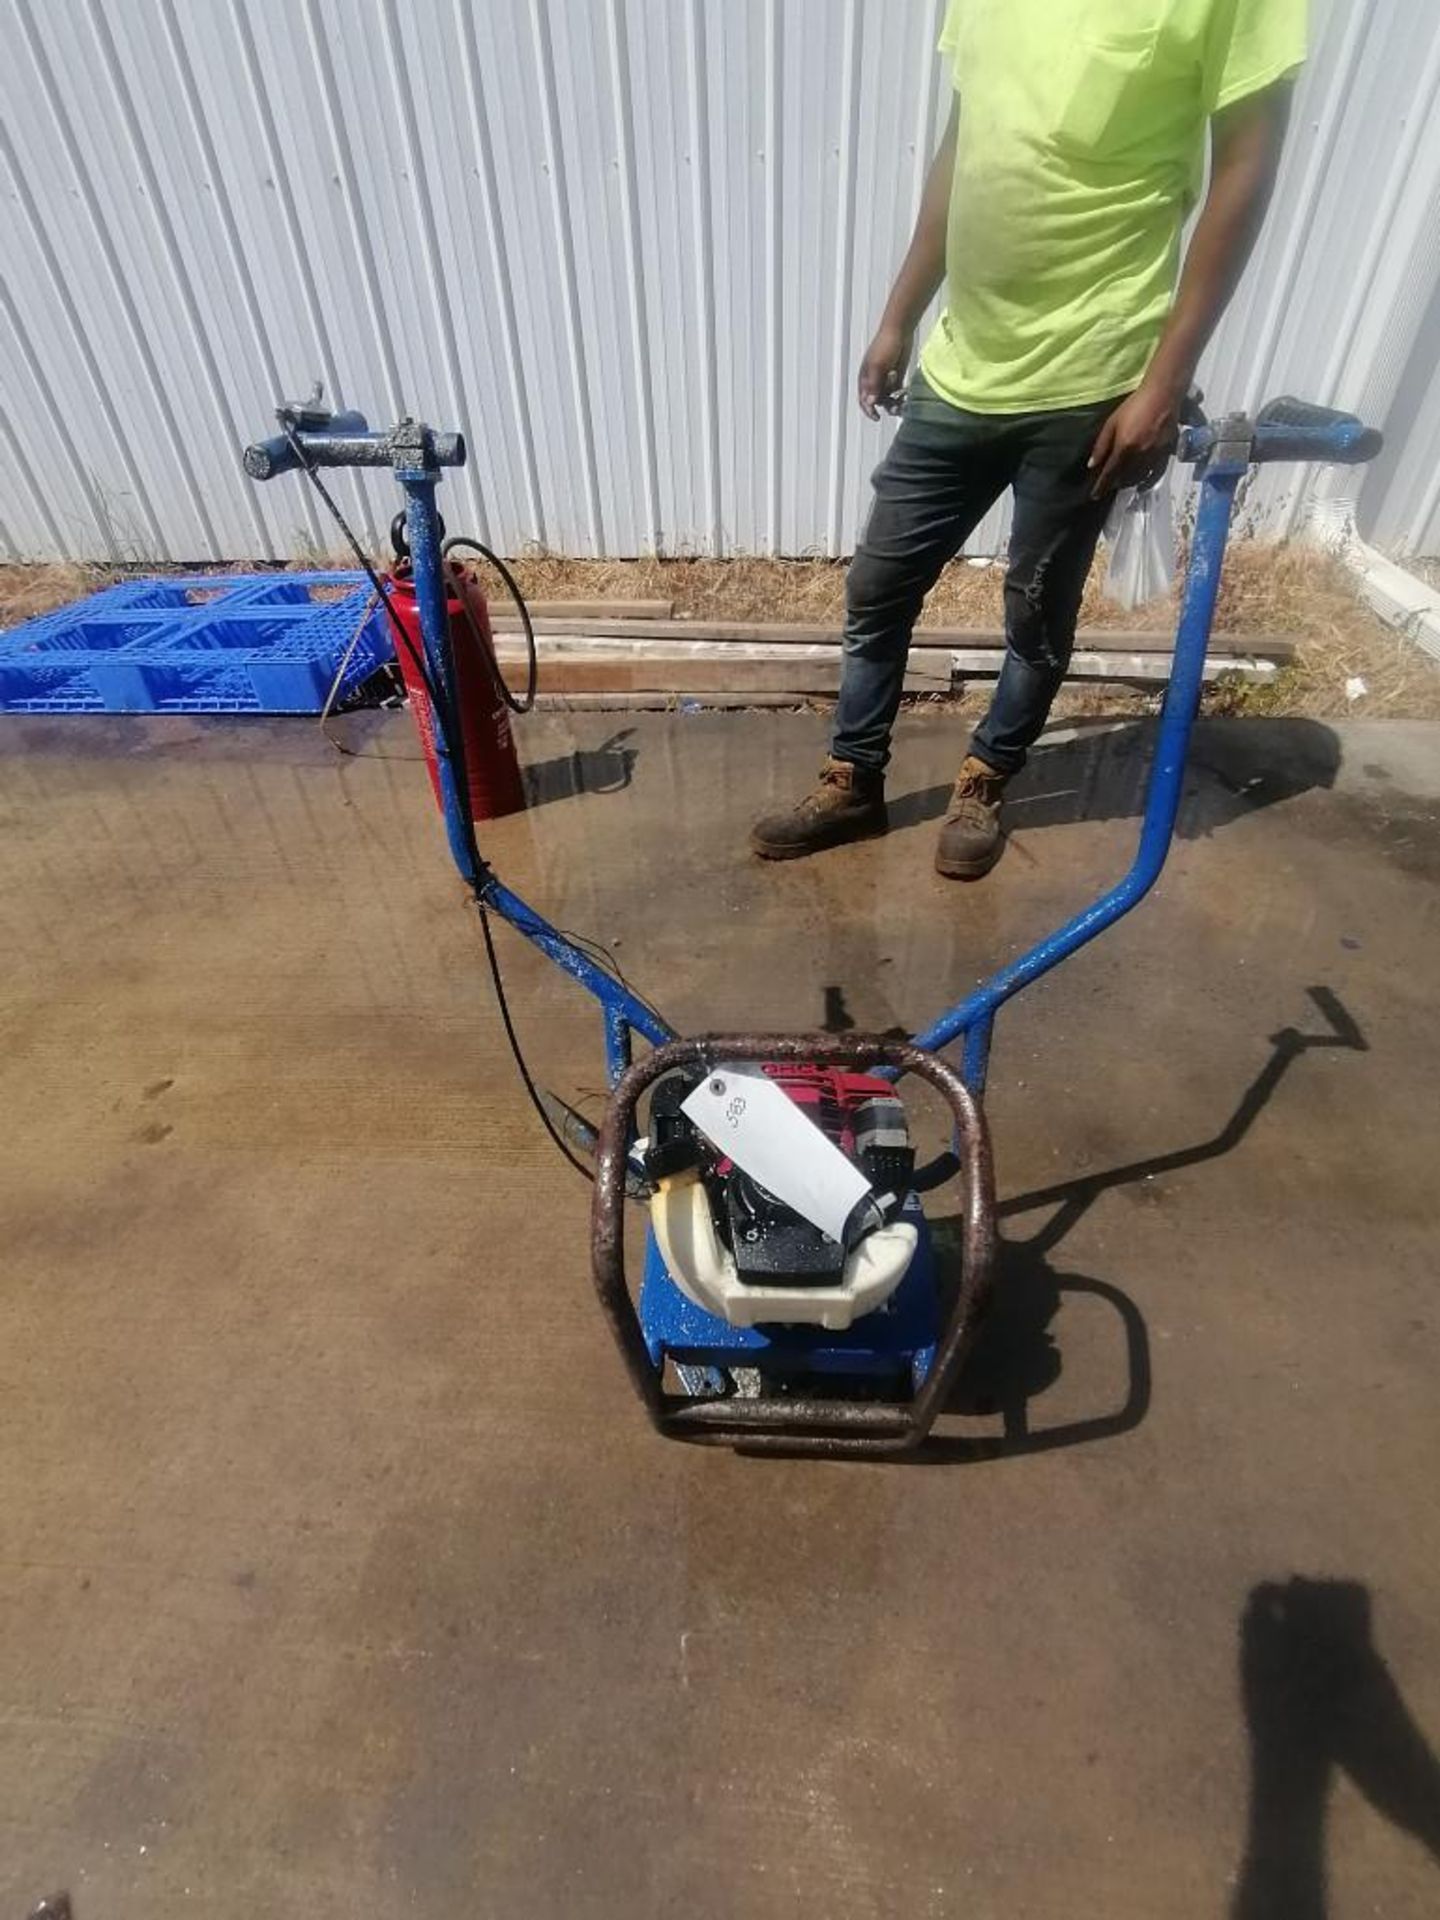 Shockwave Power Screed with Honda GX35 Motor. Serial #3297, 59.3 Hours. Located in Mt. Pleasant, IA